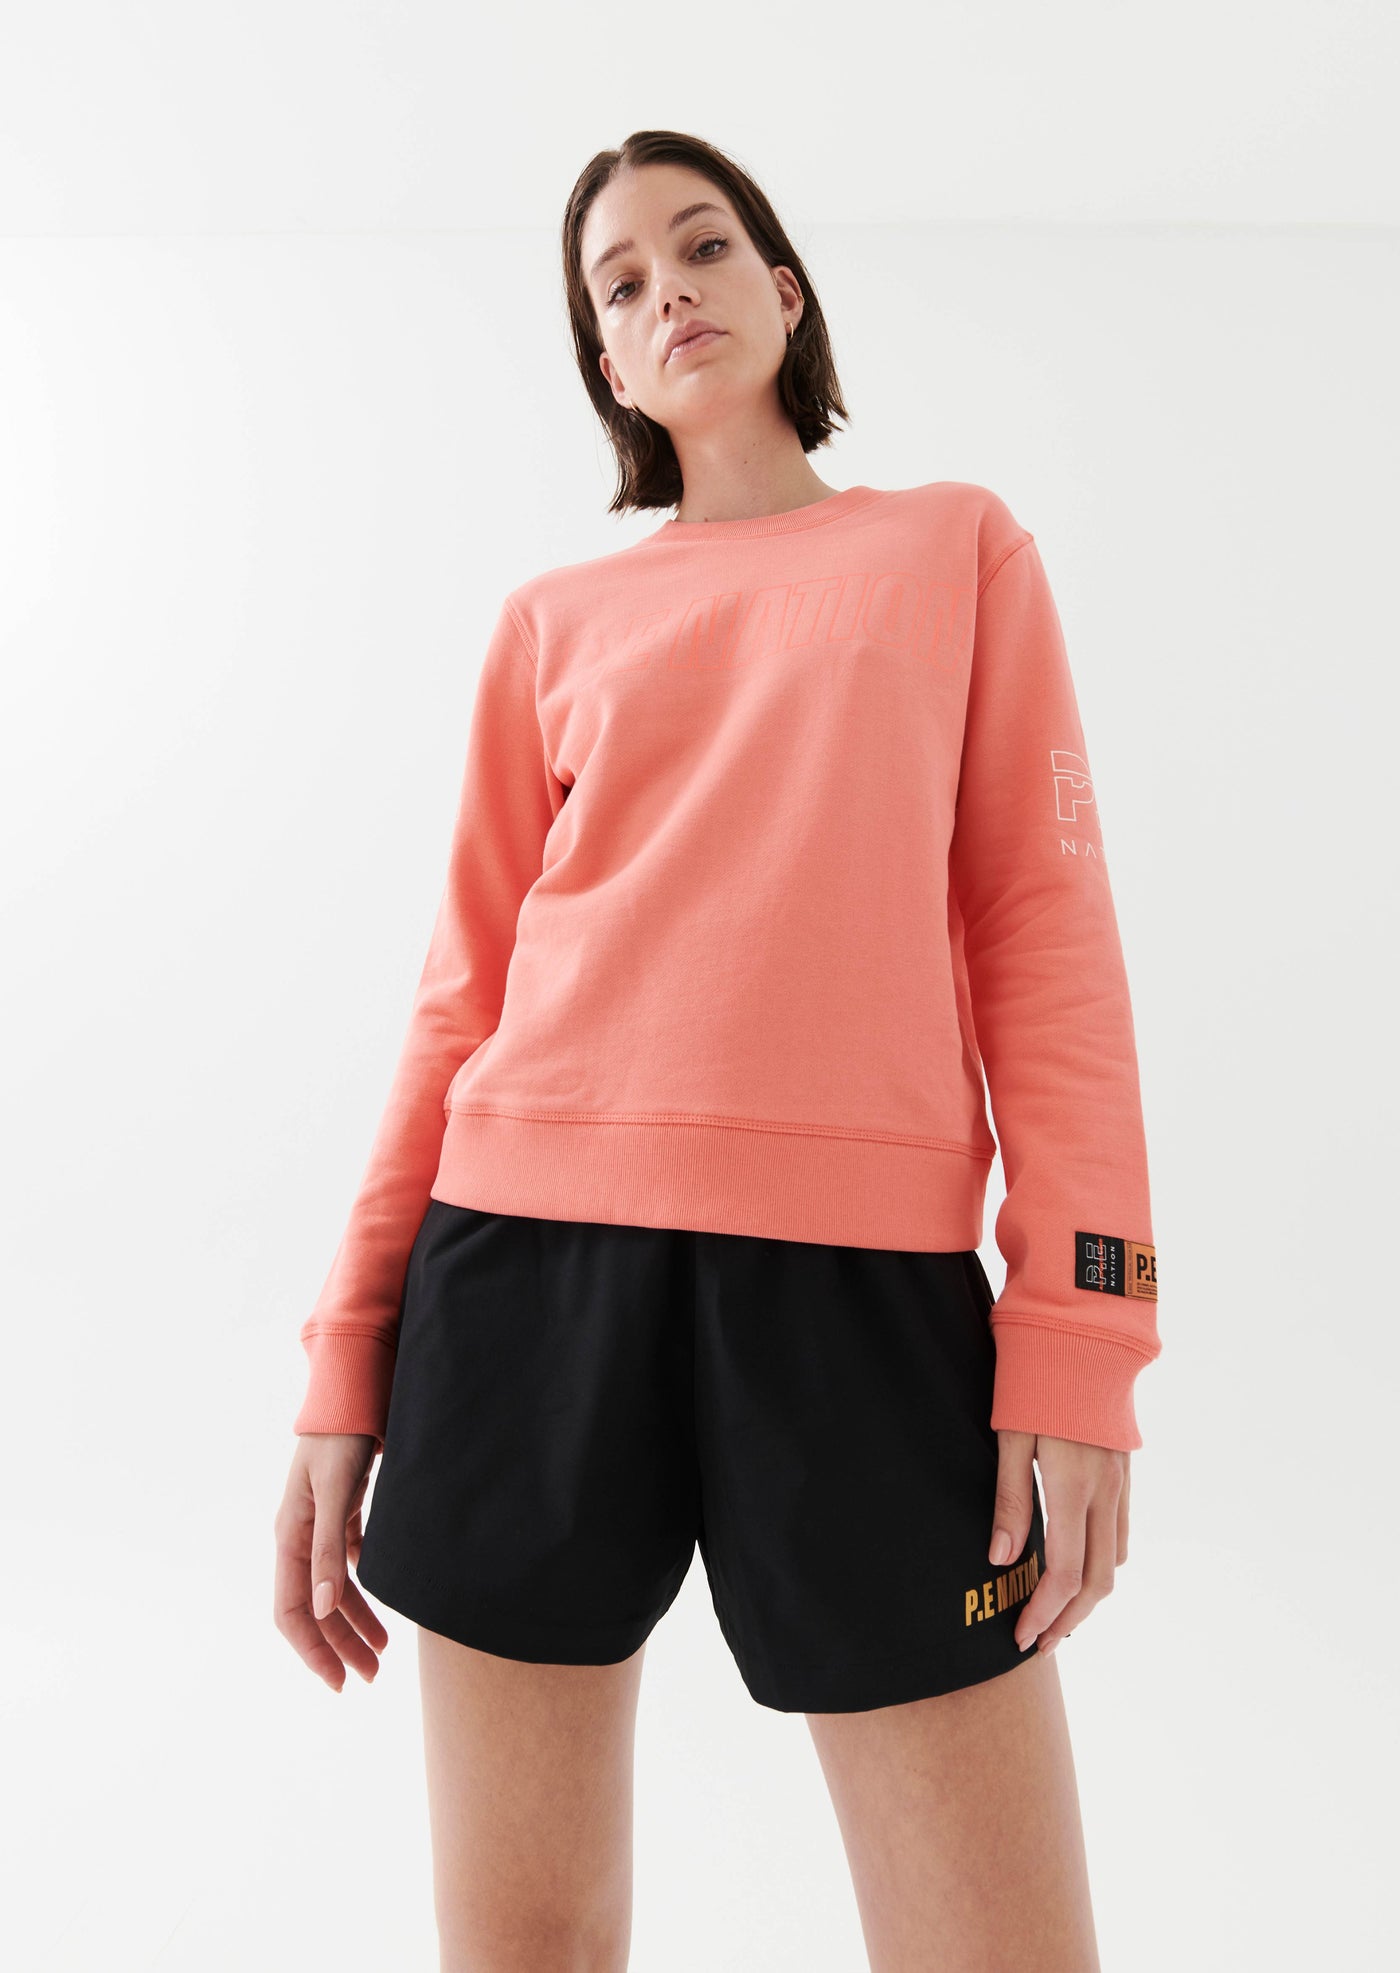 OUTRUN SWEAT IN PERSIMMON